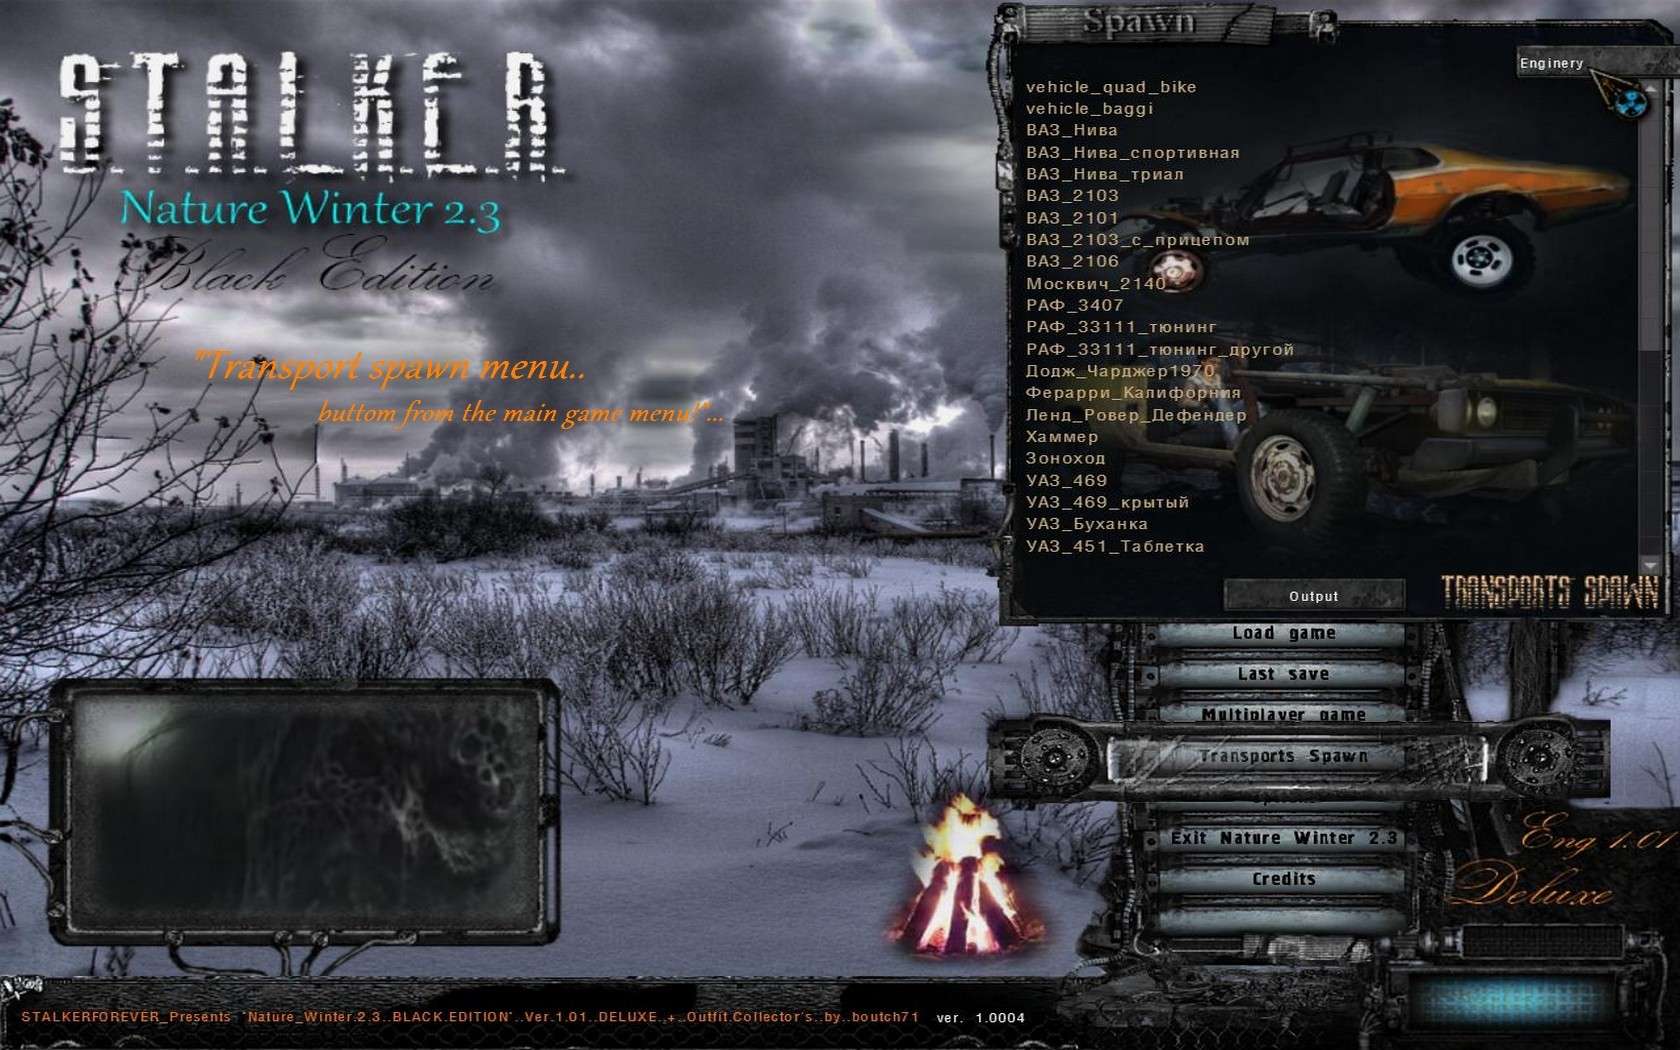 Nature Winter 2.3 Black Edition (eng 1.01 Deluxe) Images Gallery! Serie:1# Ss_bou21